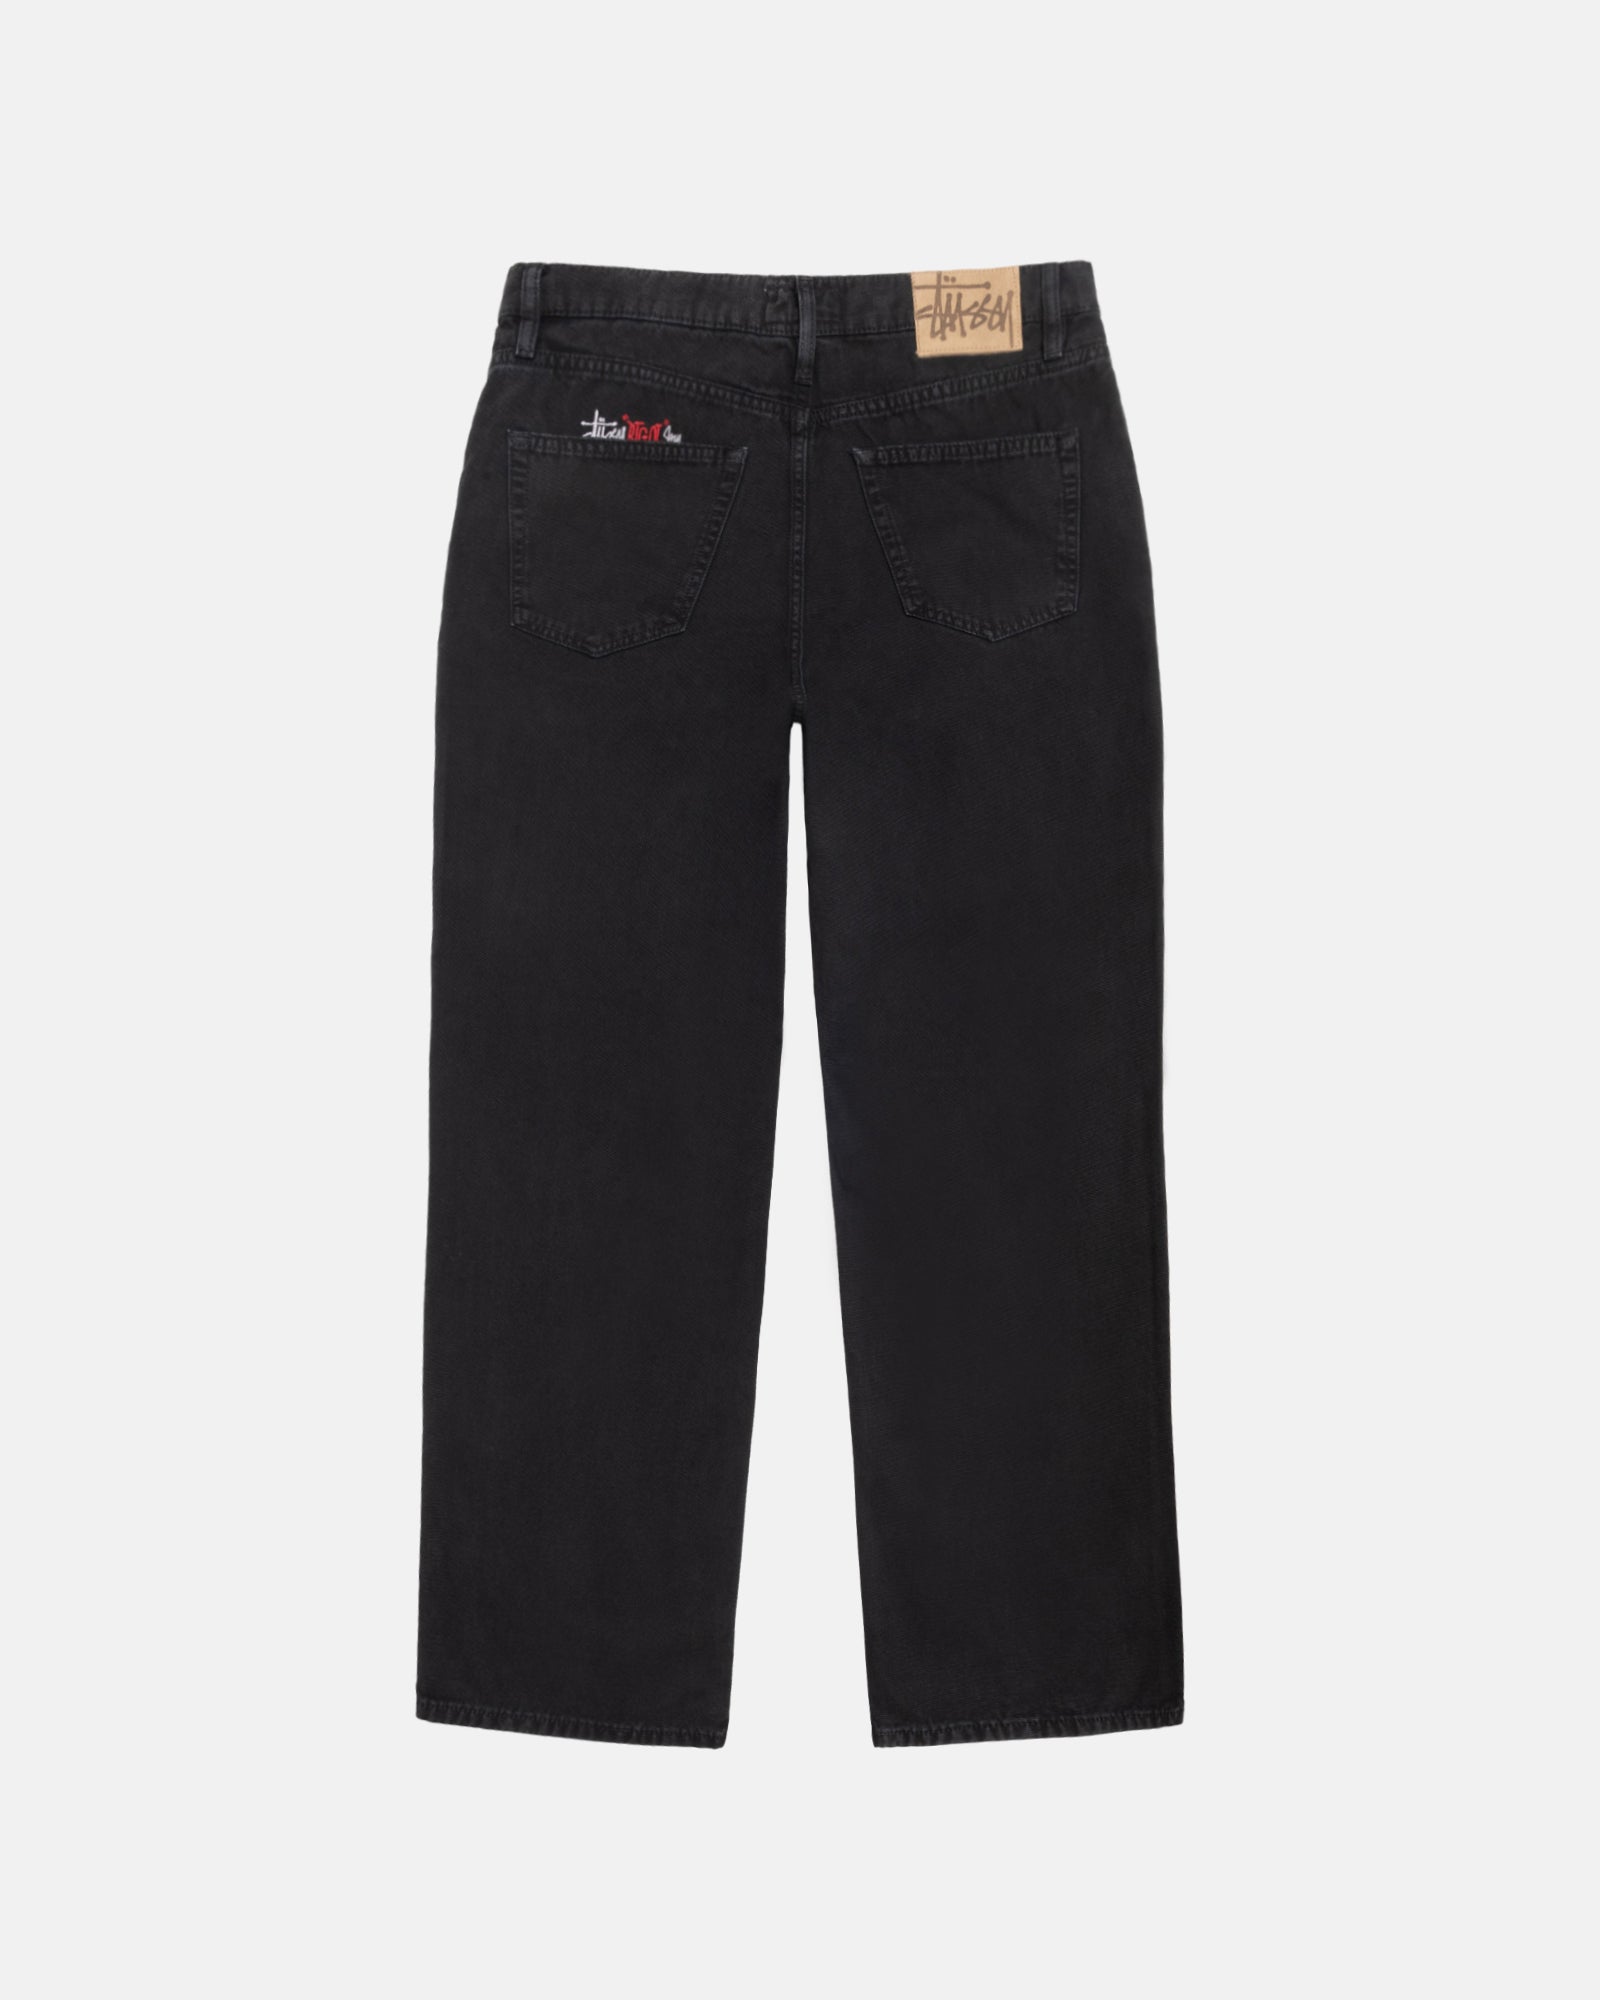 STÜSSY CLASSIC JEAN WASHED CANVAS WASHED BLACK PANTS